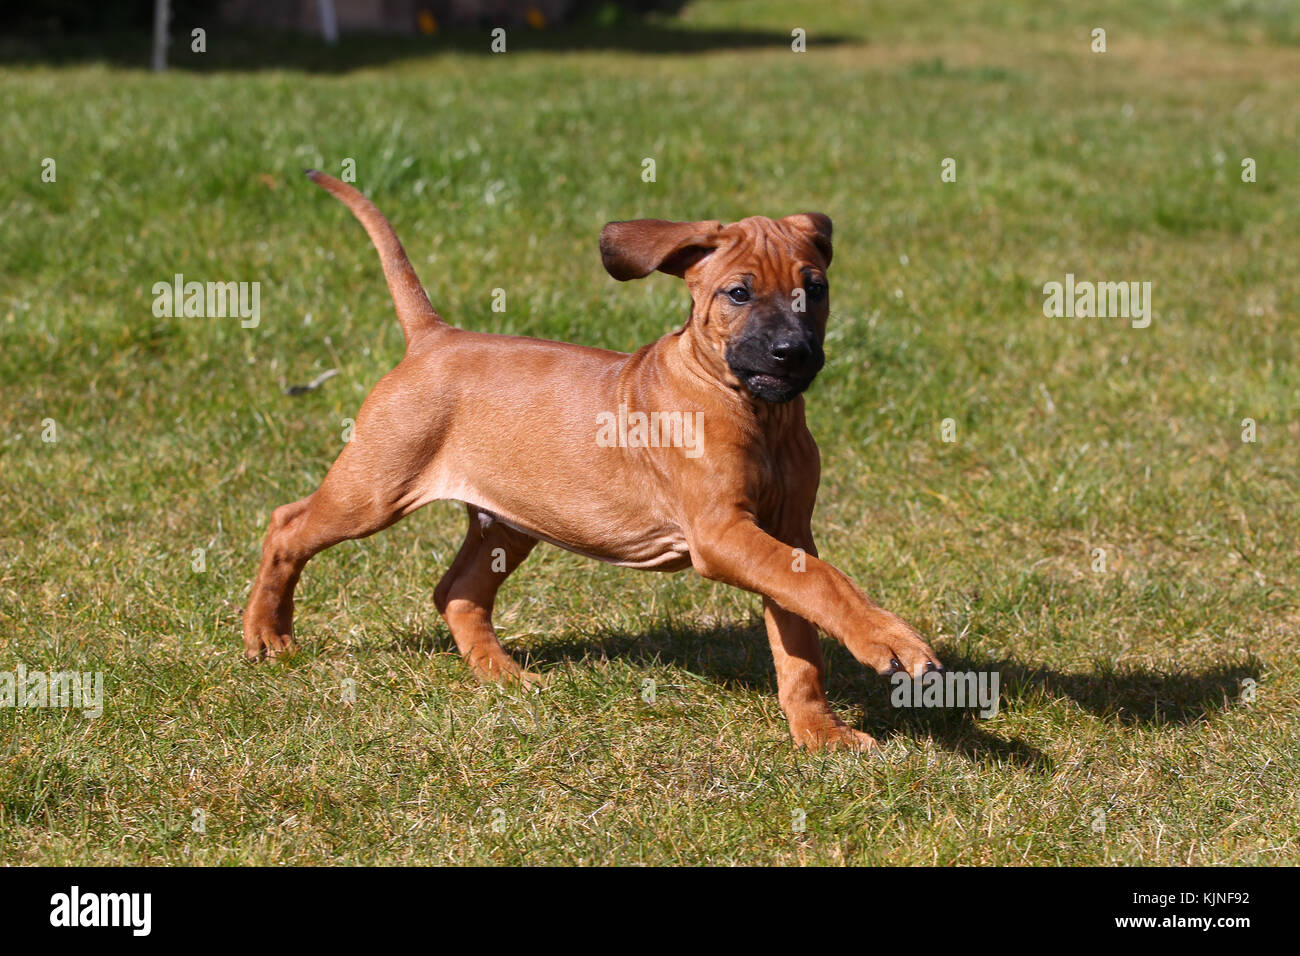 Rhodesian Ridgeback Lion Dog African Lion Hound 8 week old puppy running on grass with ears flying and tail in air Stock Photo